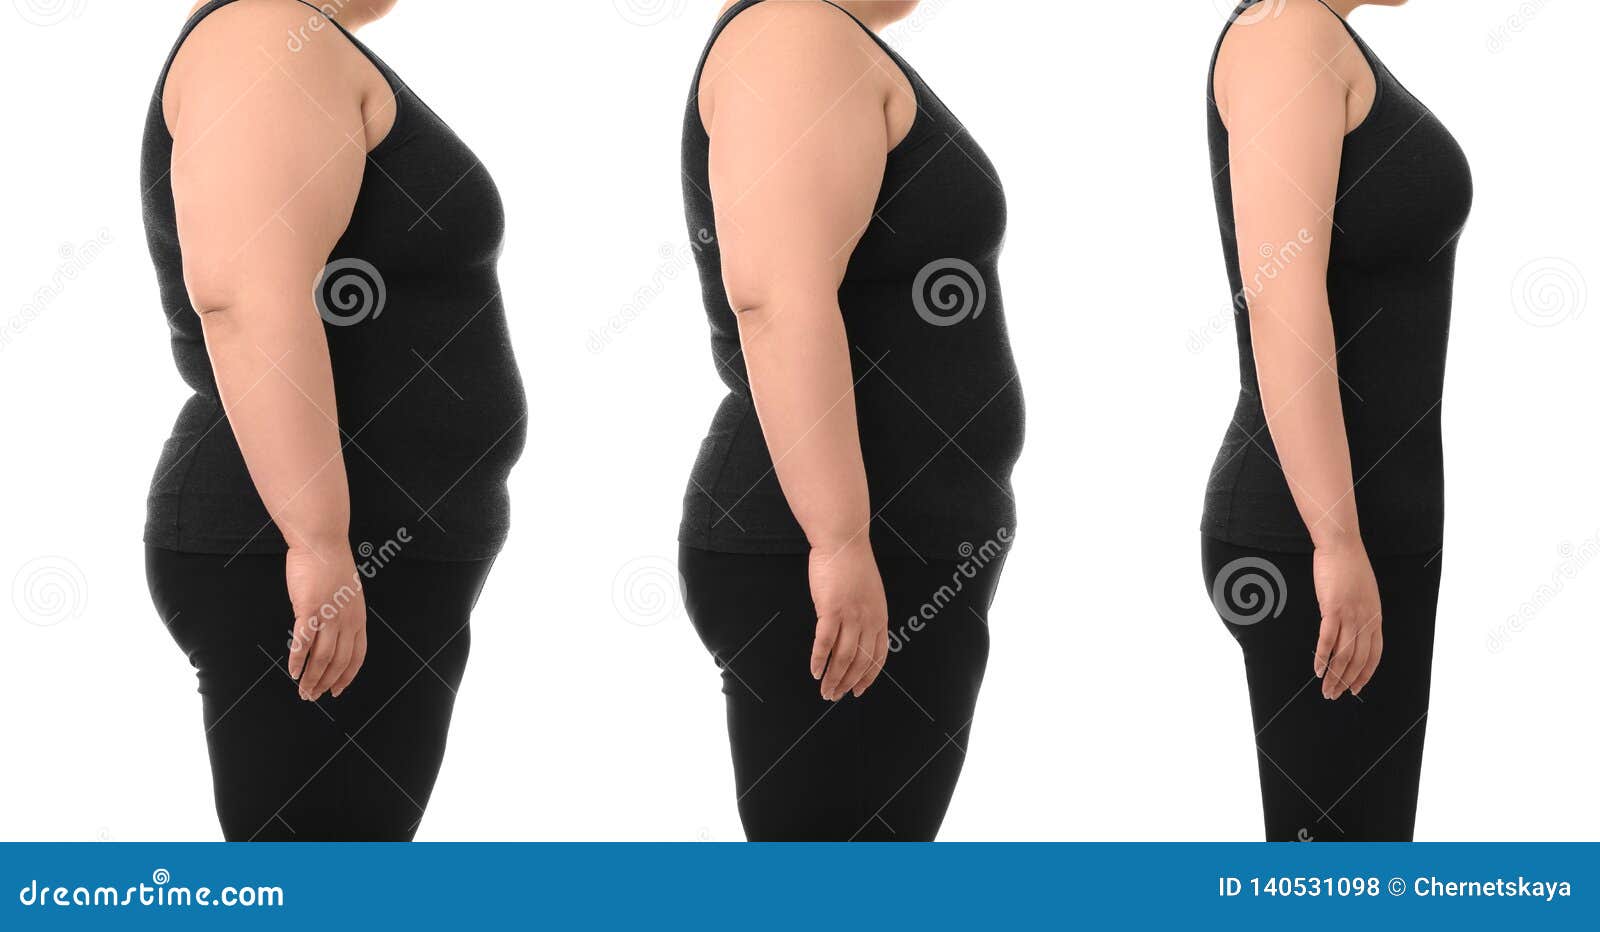 Weight loss accessories isolated on white background Stock Photo